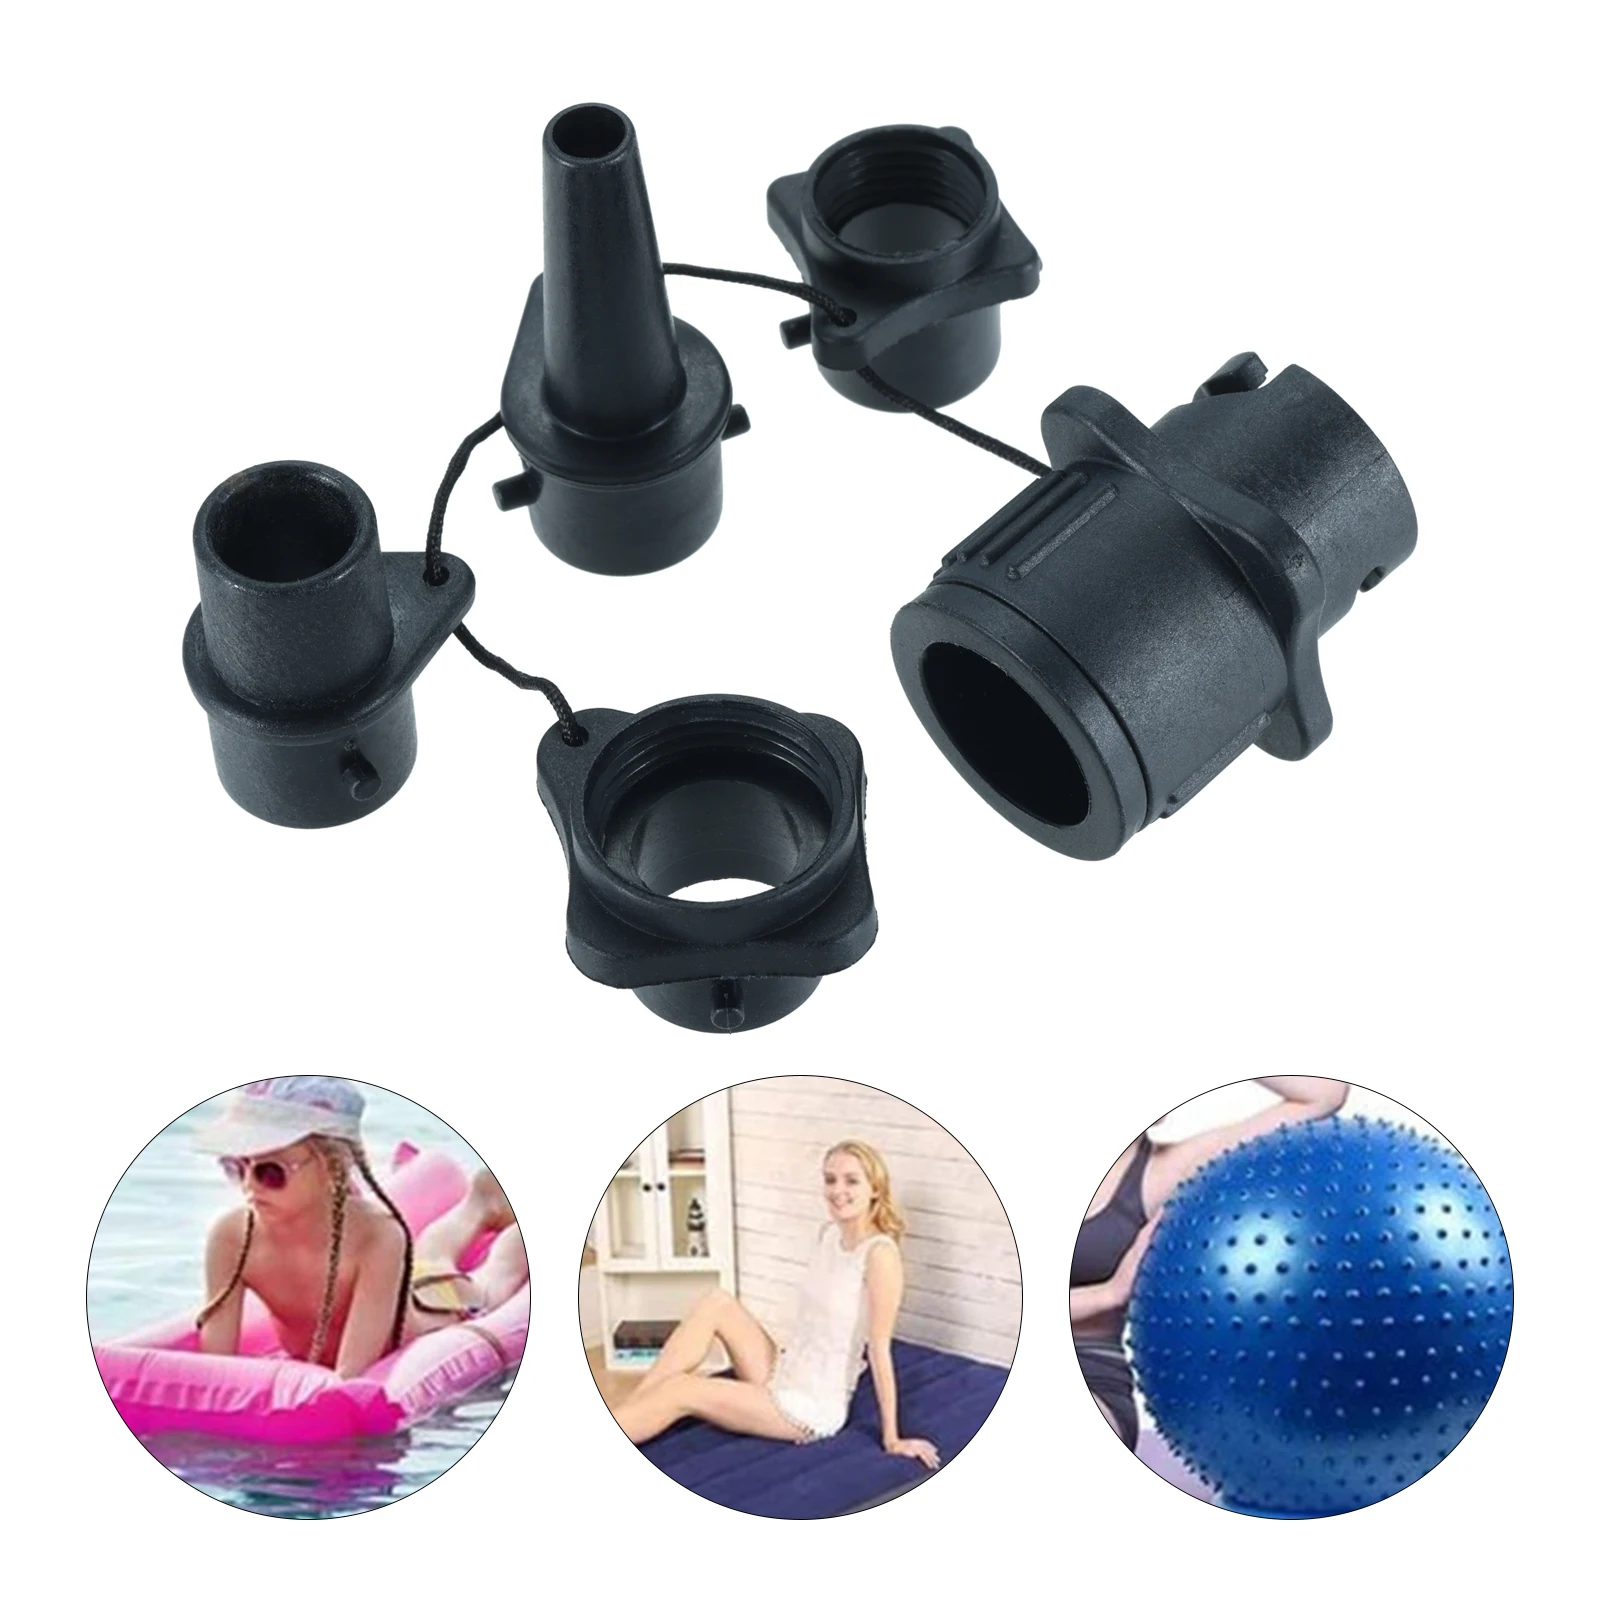 water tank cap cover glider mop hose nozzle connector brush head for x5 steaming mop accessory replacement part 1 Set Air Valve Nozzle Adapter Kit Black Plastic Multi-Function Hose Connector Surf Paddle Board Canoe Inflatable Boat Accessory